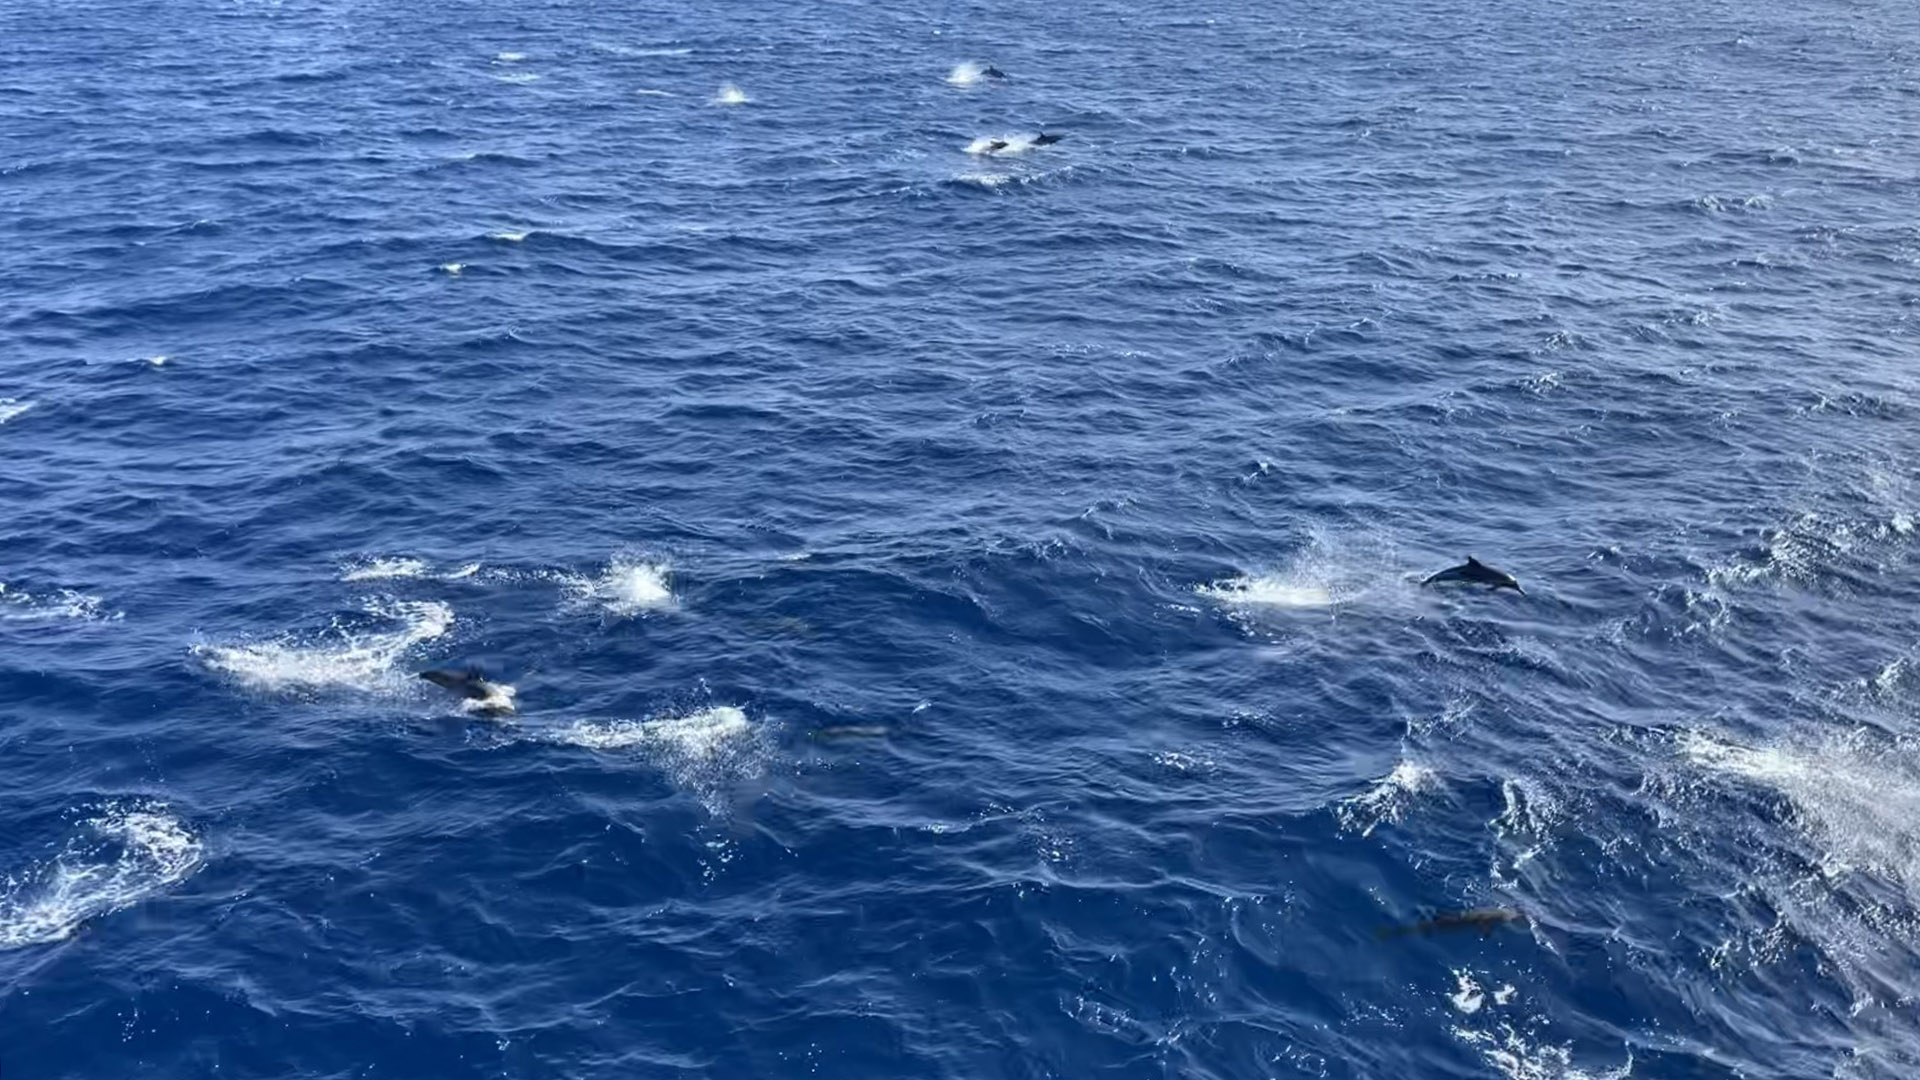 Large pod of dolphins follows alongside the ship. Picture by Teresa Kennedy (UT Tyler; URI)